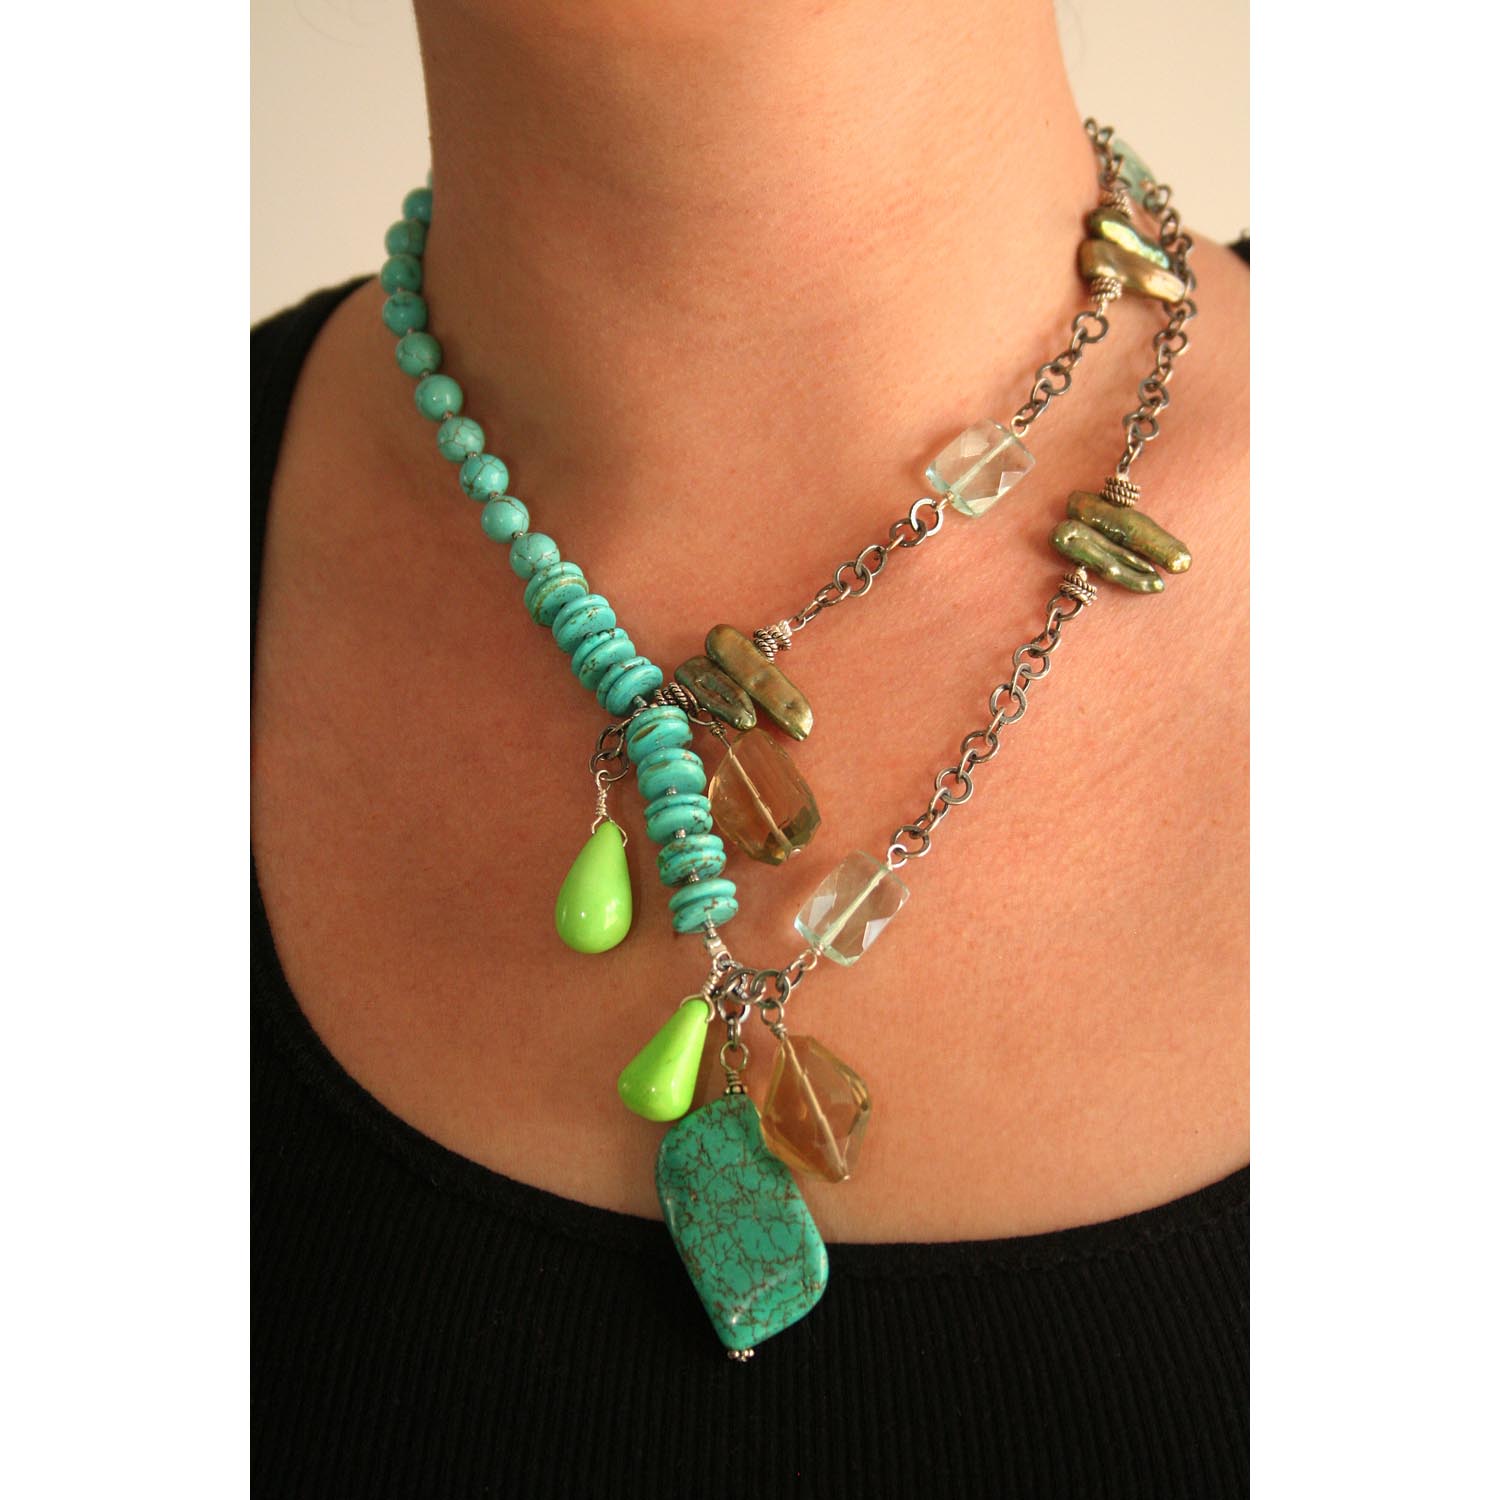 Asymmetrical turquoise necklace